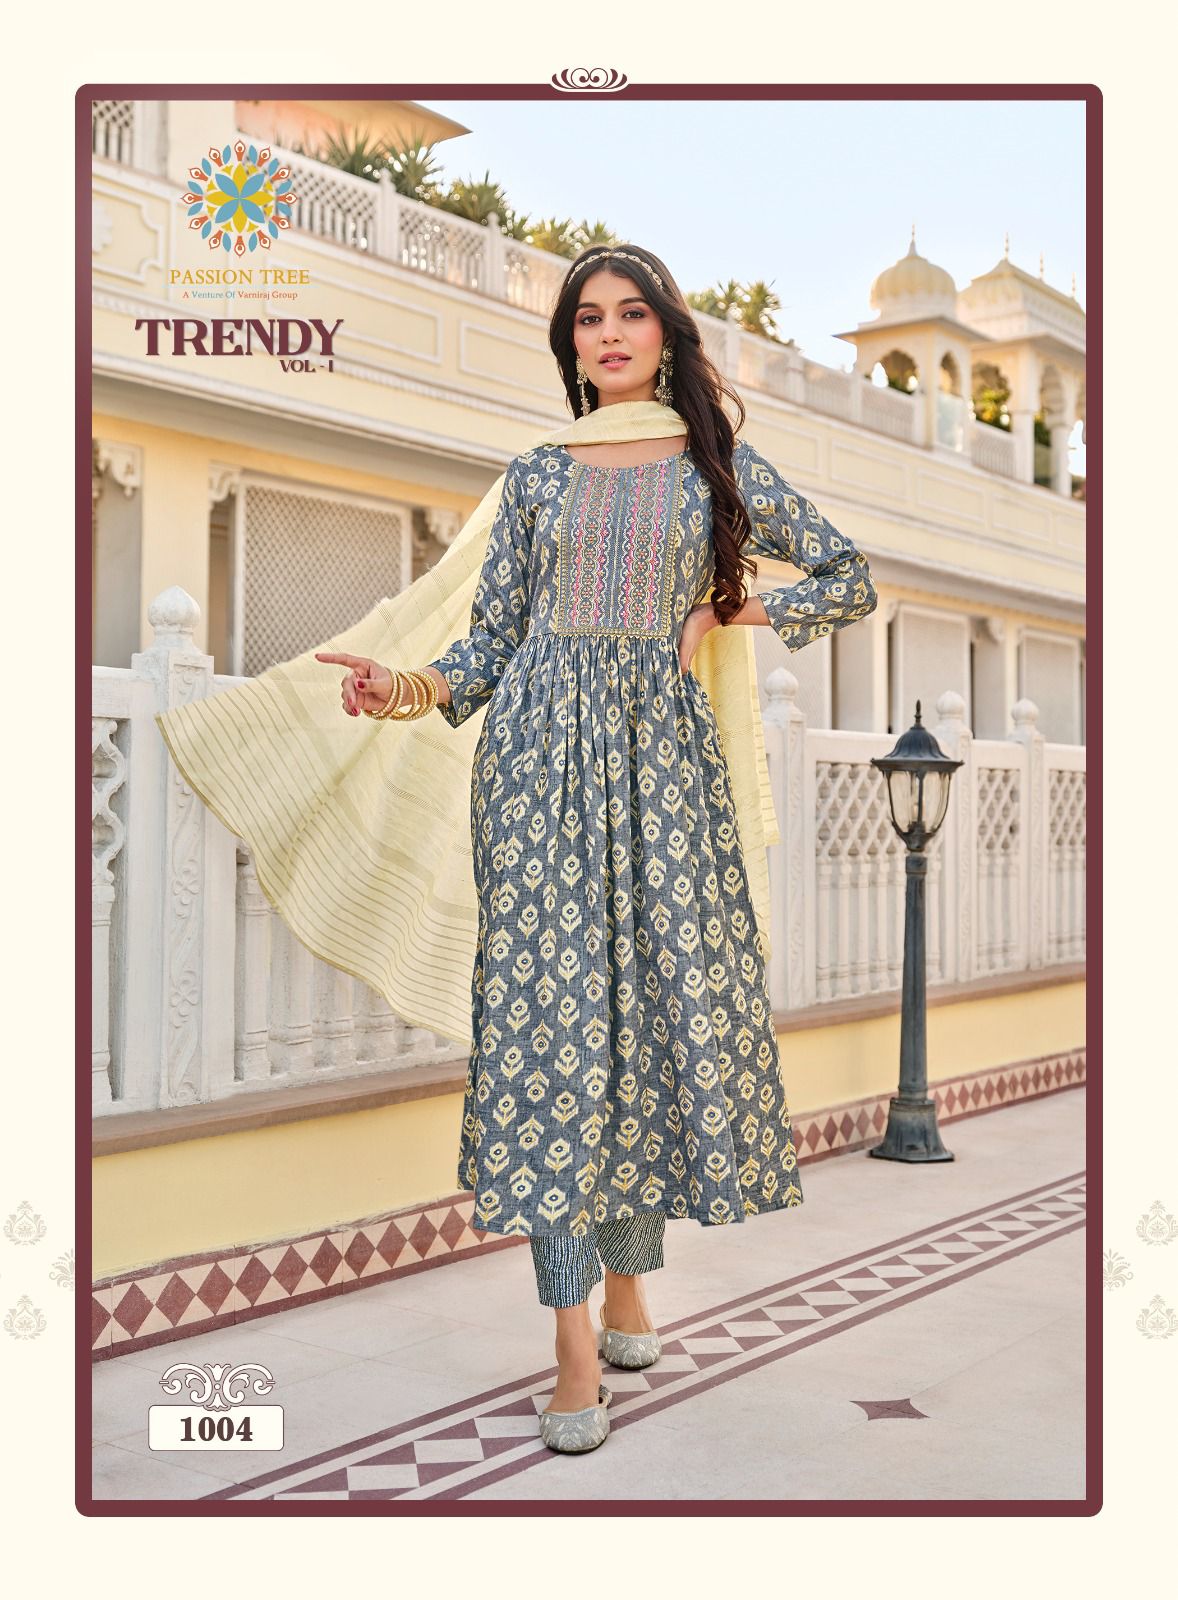 Passion Tree Trendy Vol 1 collection 4